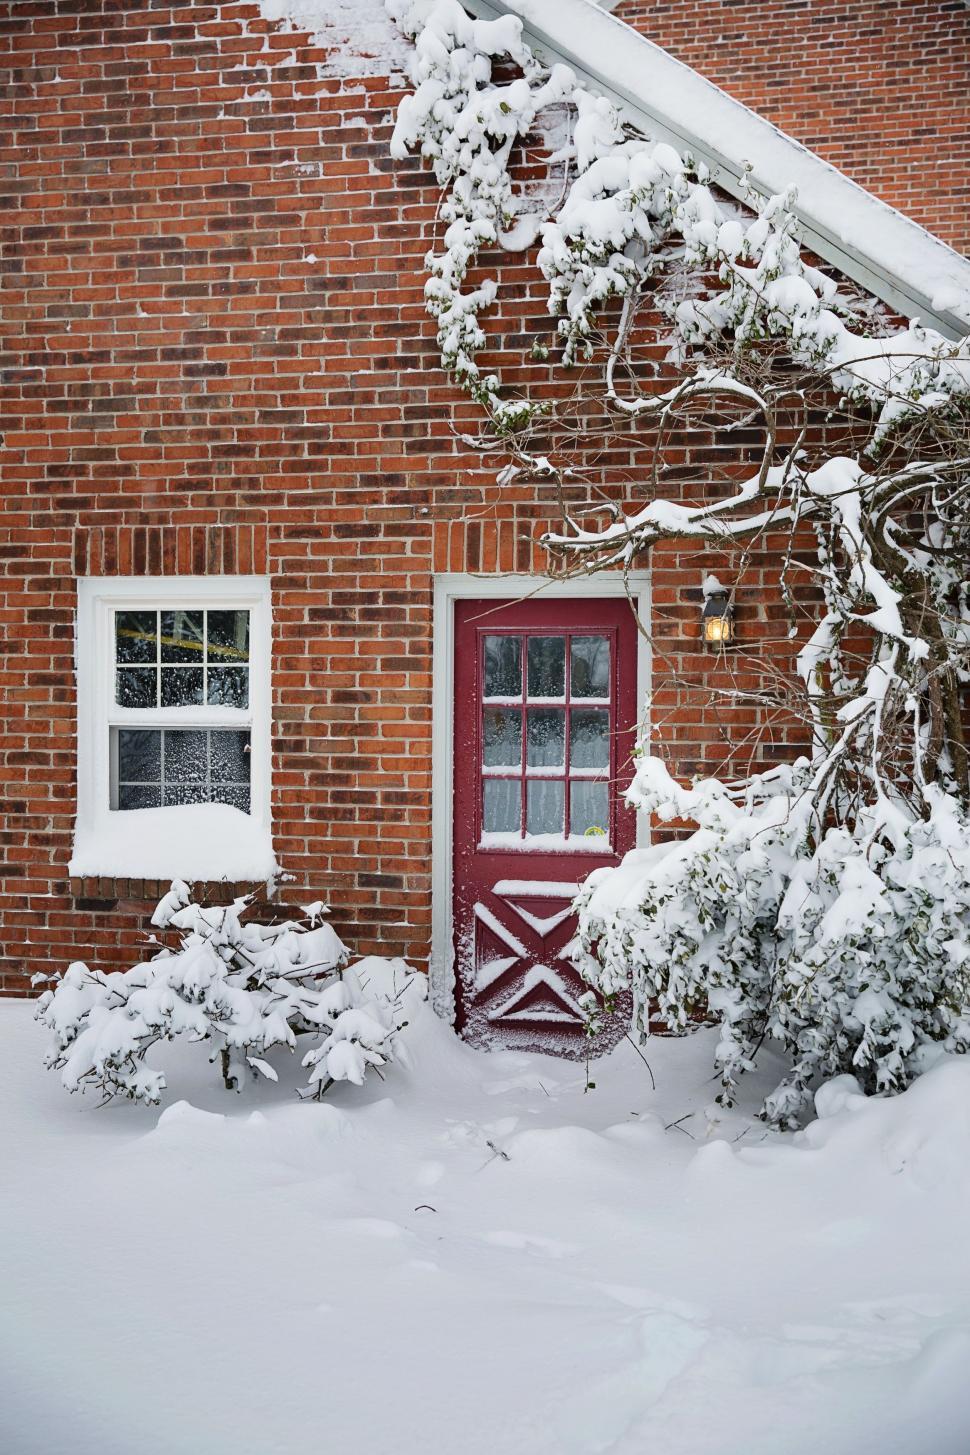 Free Image of House in Snow  